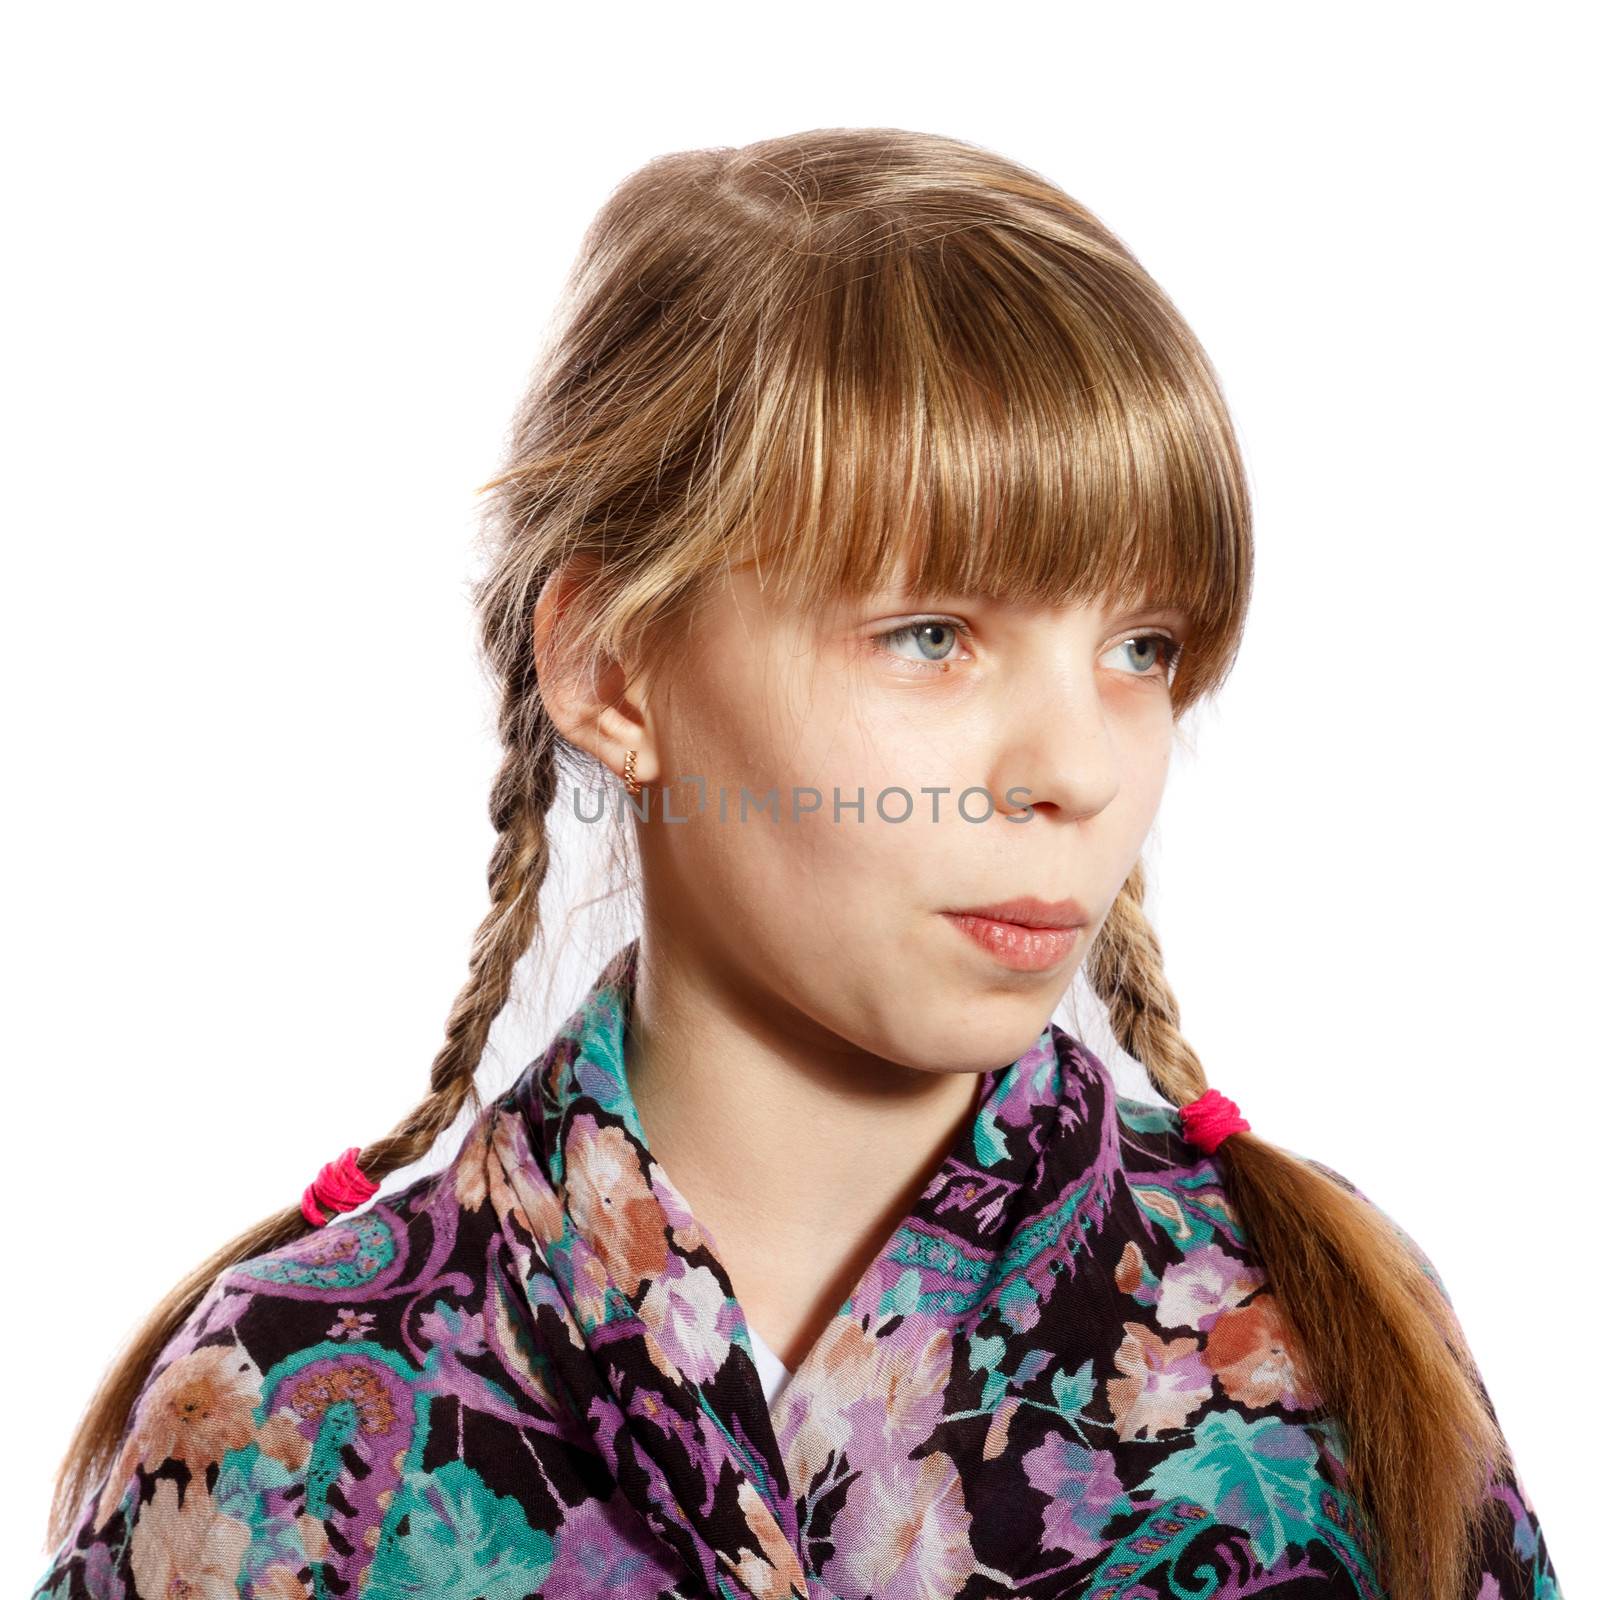 girl with braids look at something on a white background